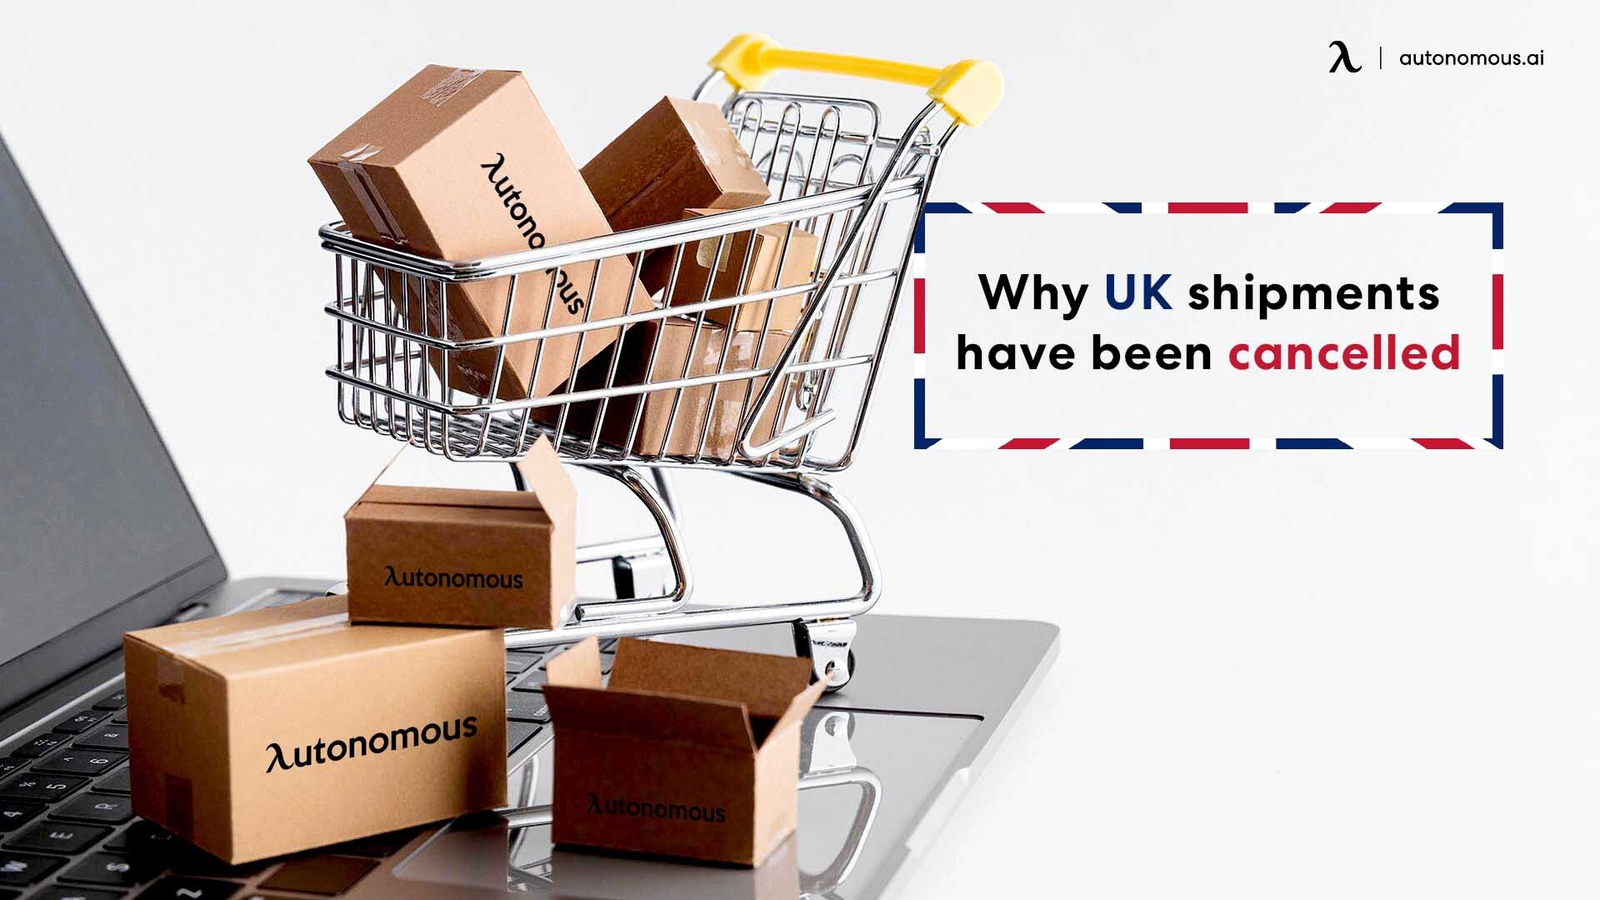 Why UK shipments have been cancelled